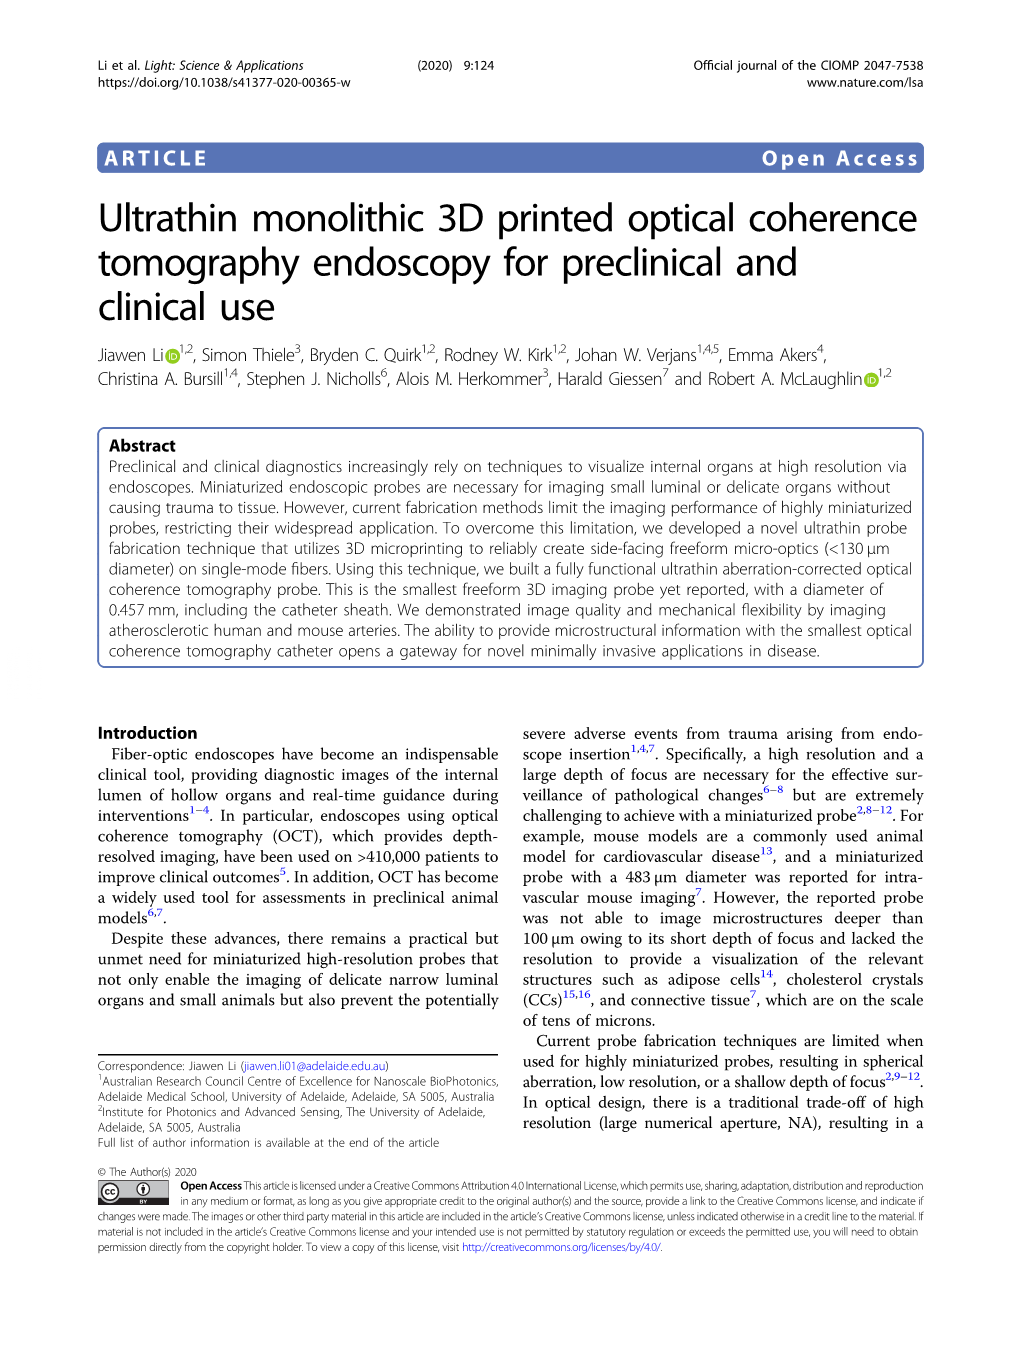 Ultrathin Monolithic 3D Printed Optical Coherence Tomography Endoscopy for Preclinical and Clinical Use Jiawen Li 1,2, Simon Thiele3, Bryden C